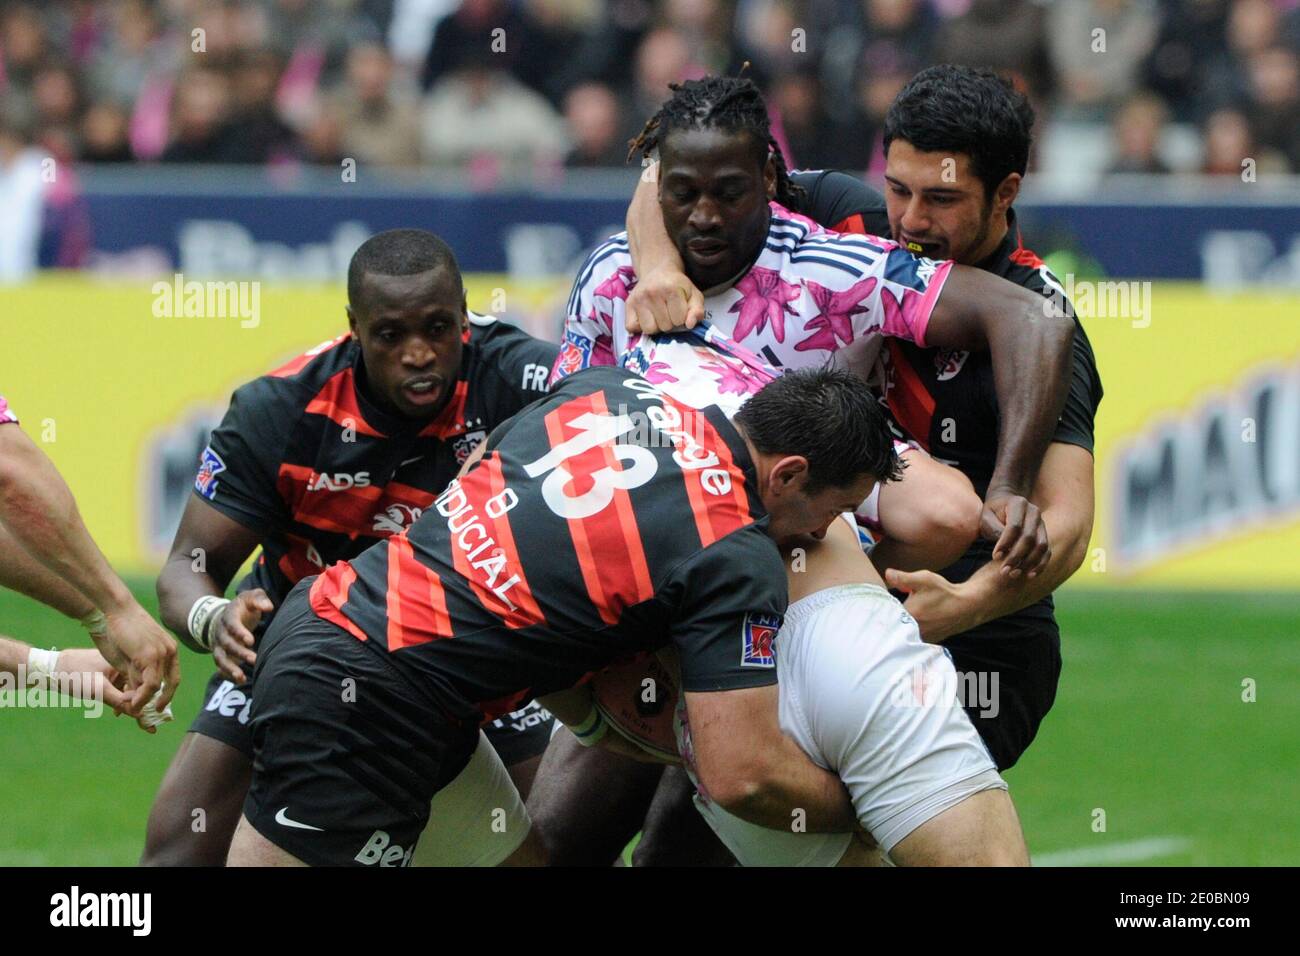 Balls catching by Toulouse's Florian Fritz on Stade Francais's Martin  Burruchaga during the French Top 14 Rugby match, Stade Francais Vs Stade  Toulousain at Stade de France in Saint-Denis near Paris, France,